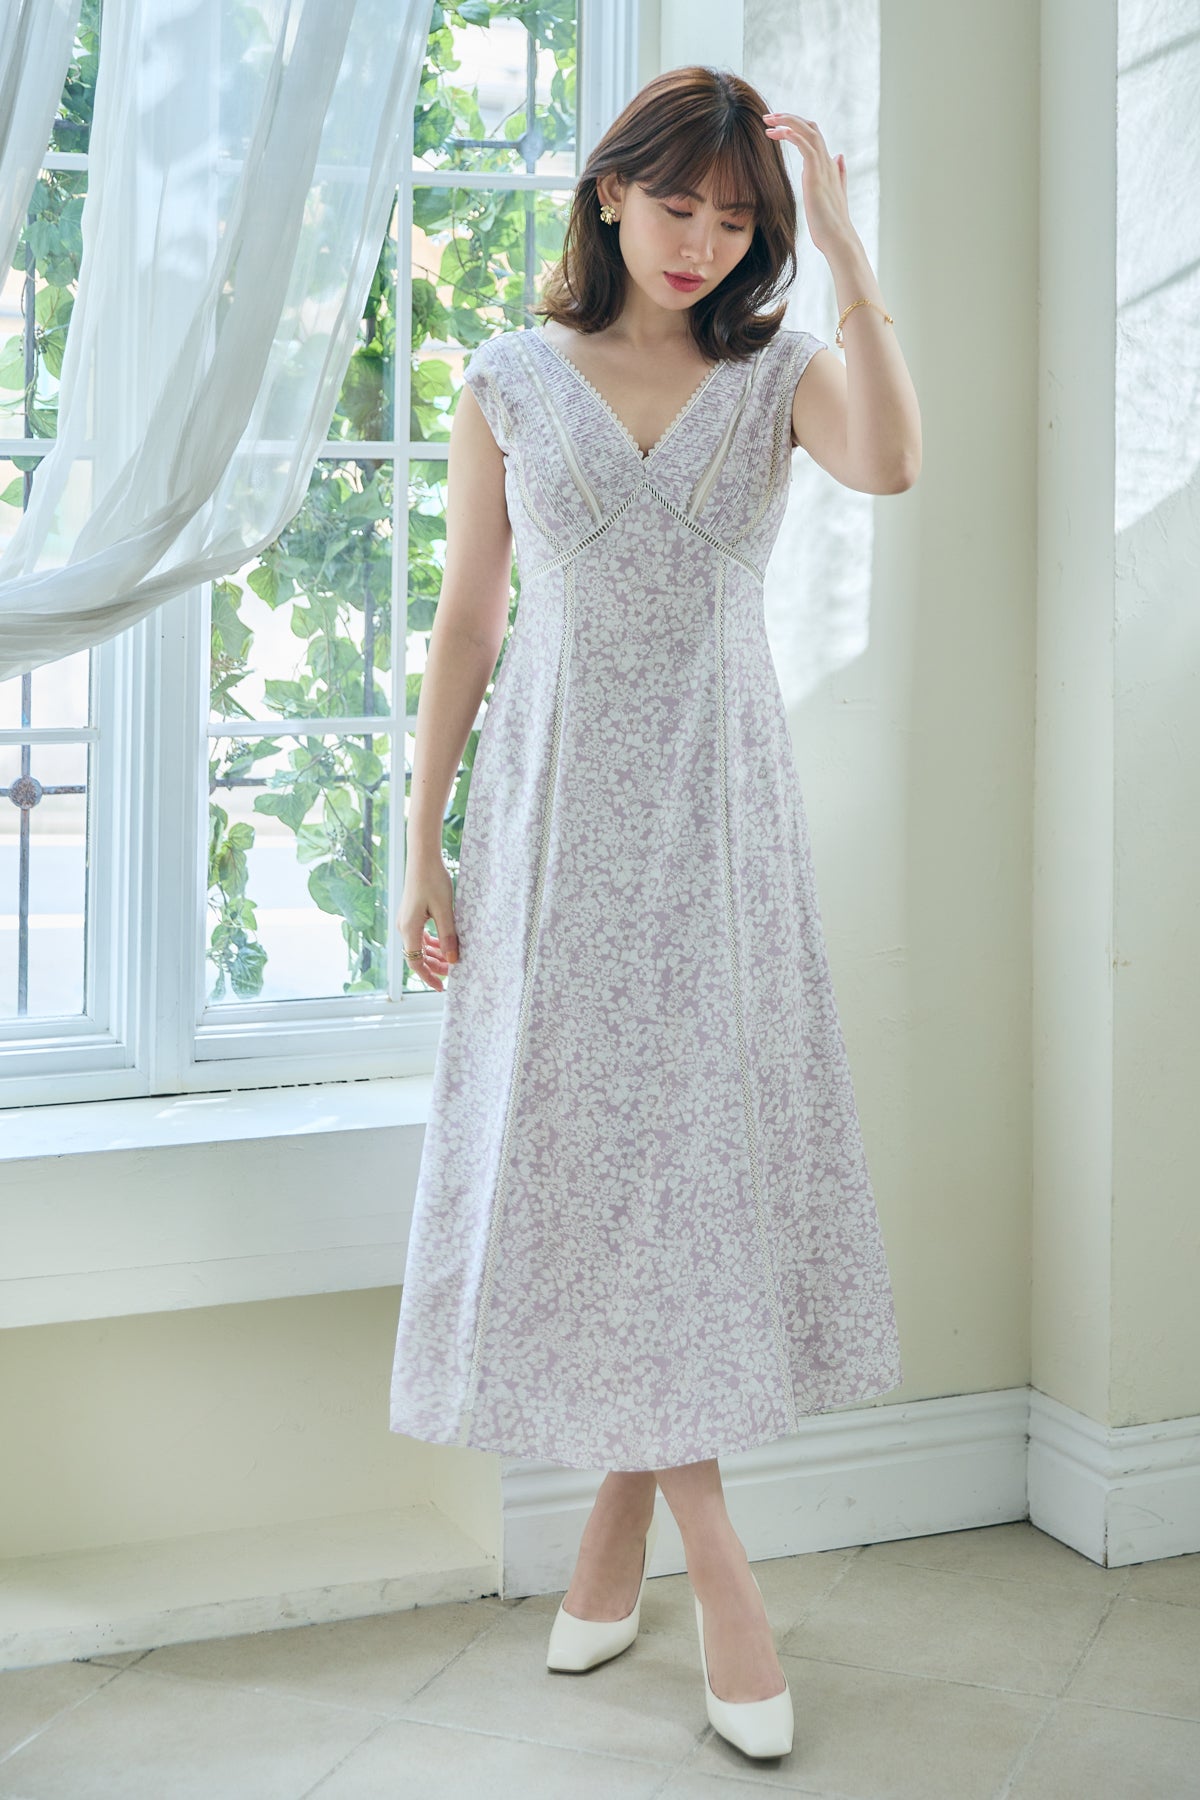 herlipto Lace Trimmed Floral Dress　フローラル